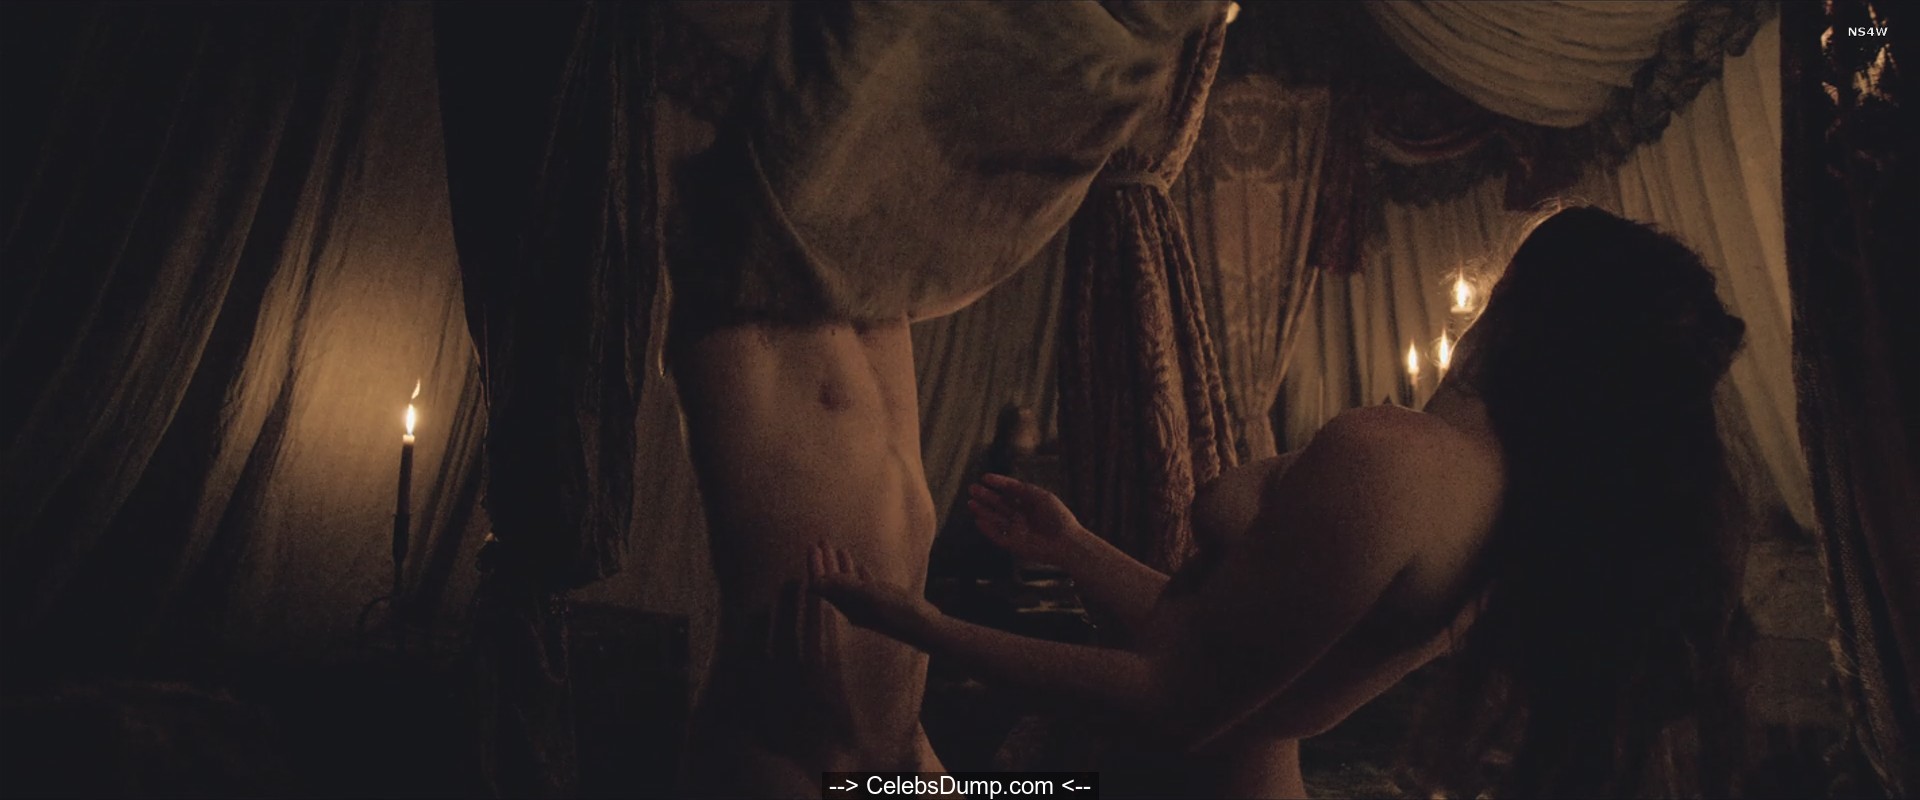 Florence Pugh nude in Outlaw King (2018.